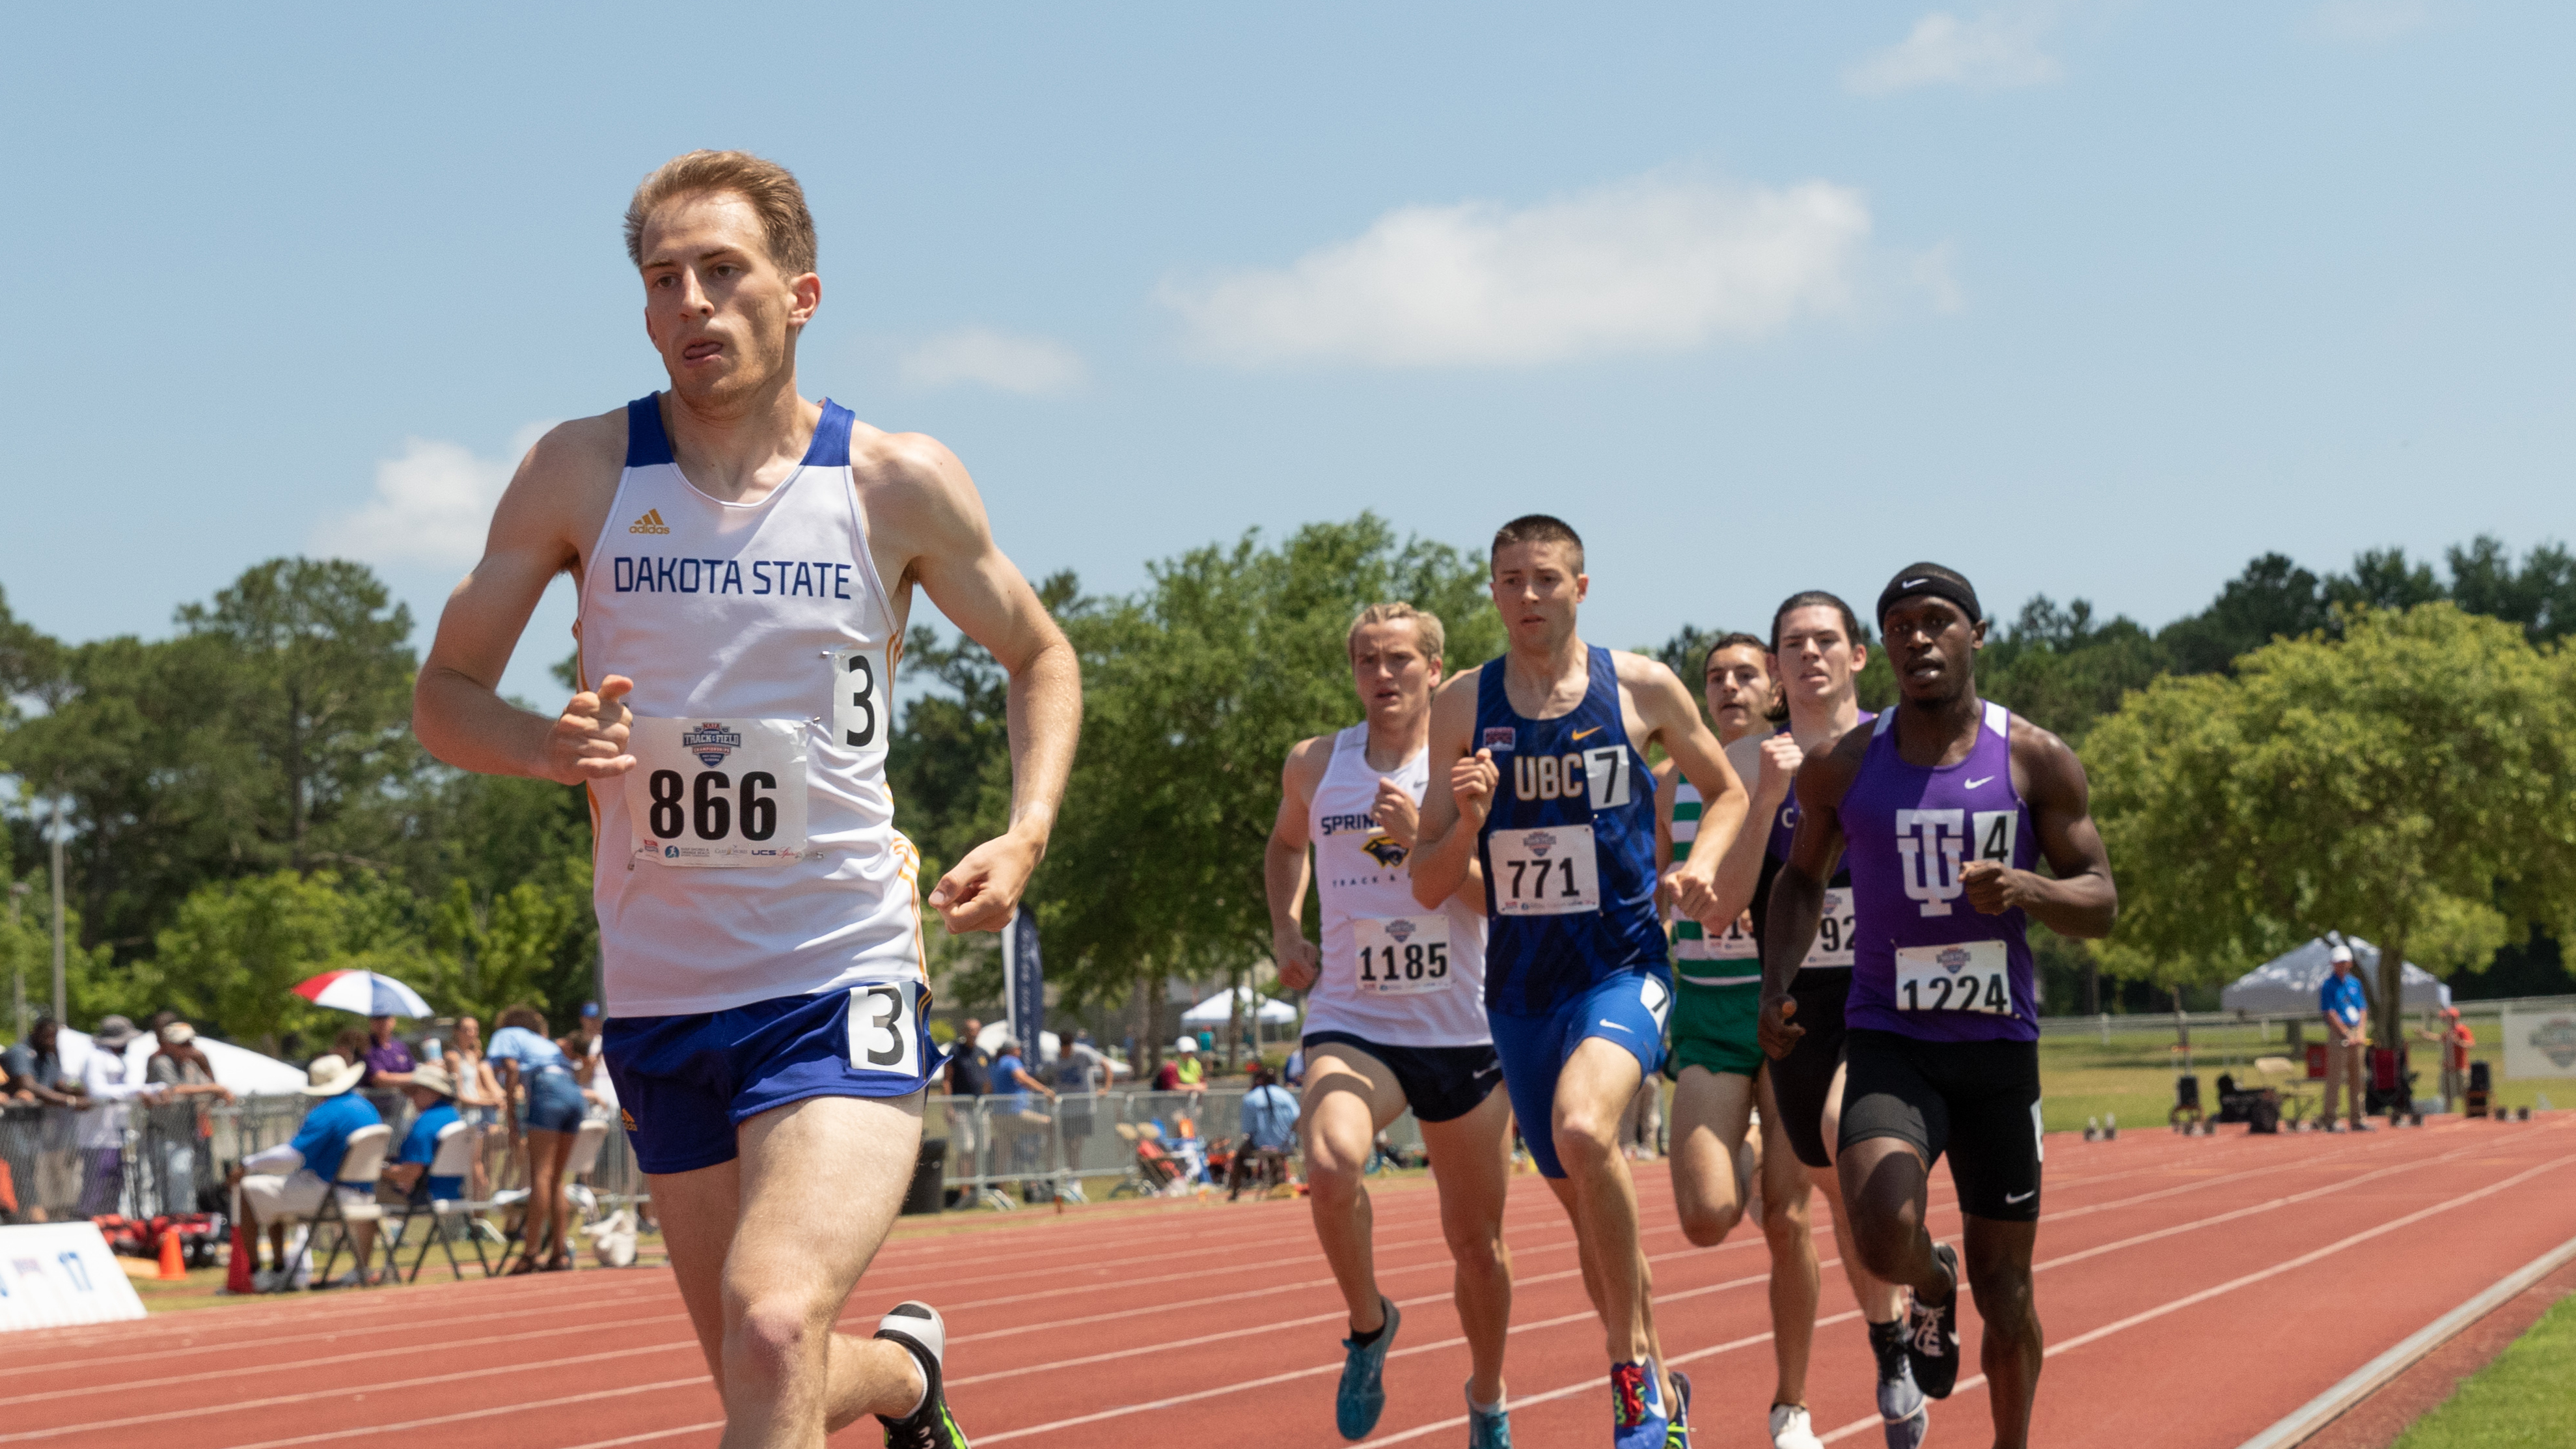 Day 2 - 2019 Men's Outdoor Track & Field Championships